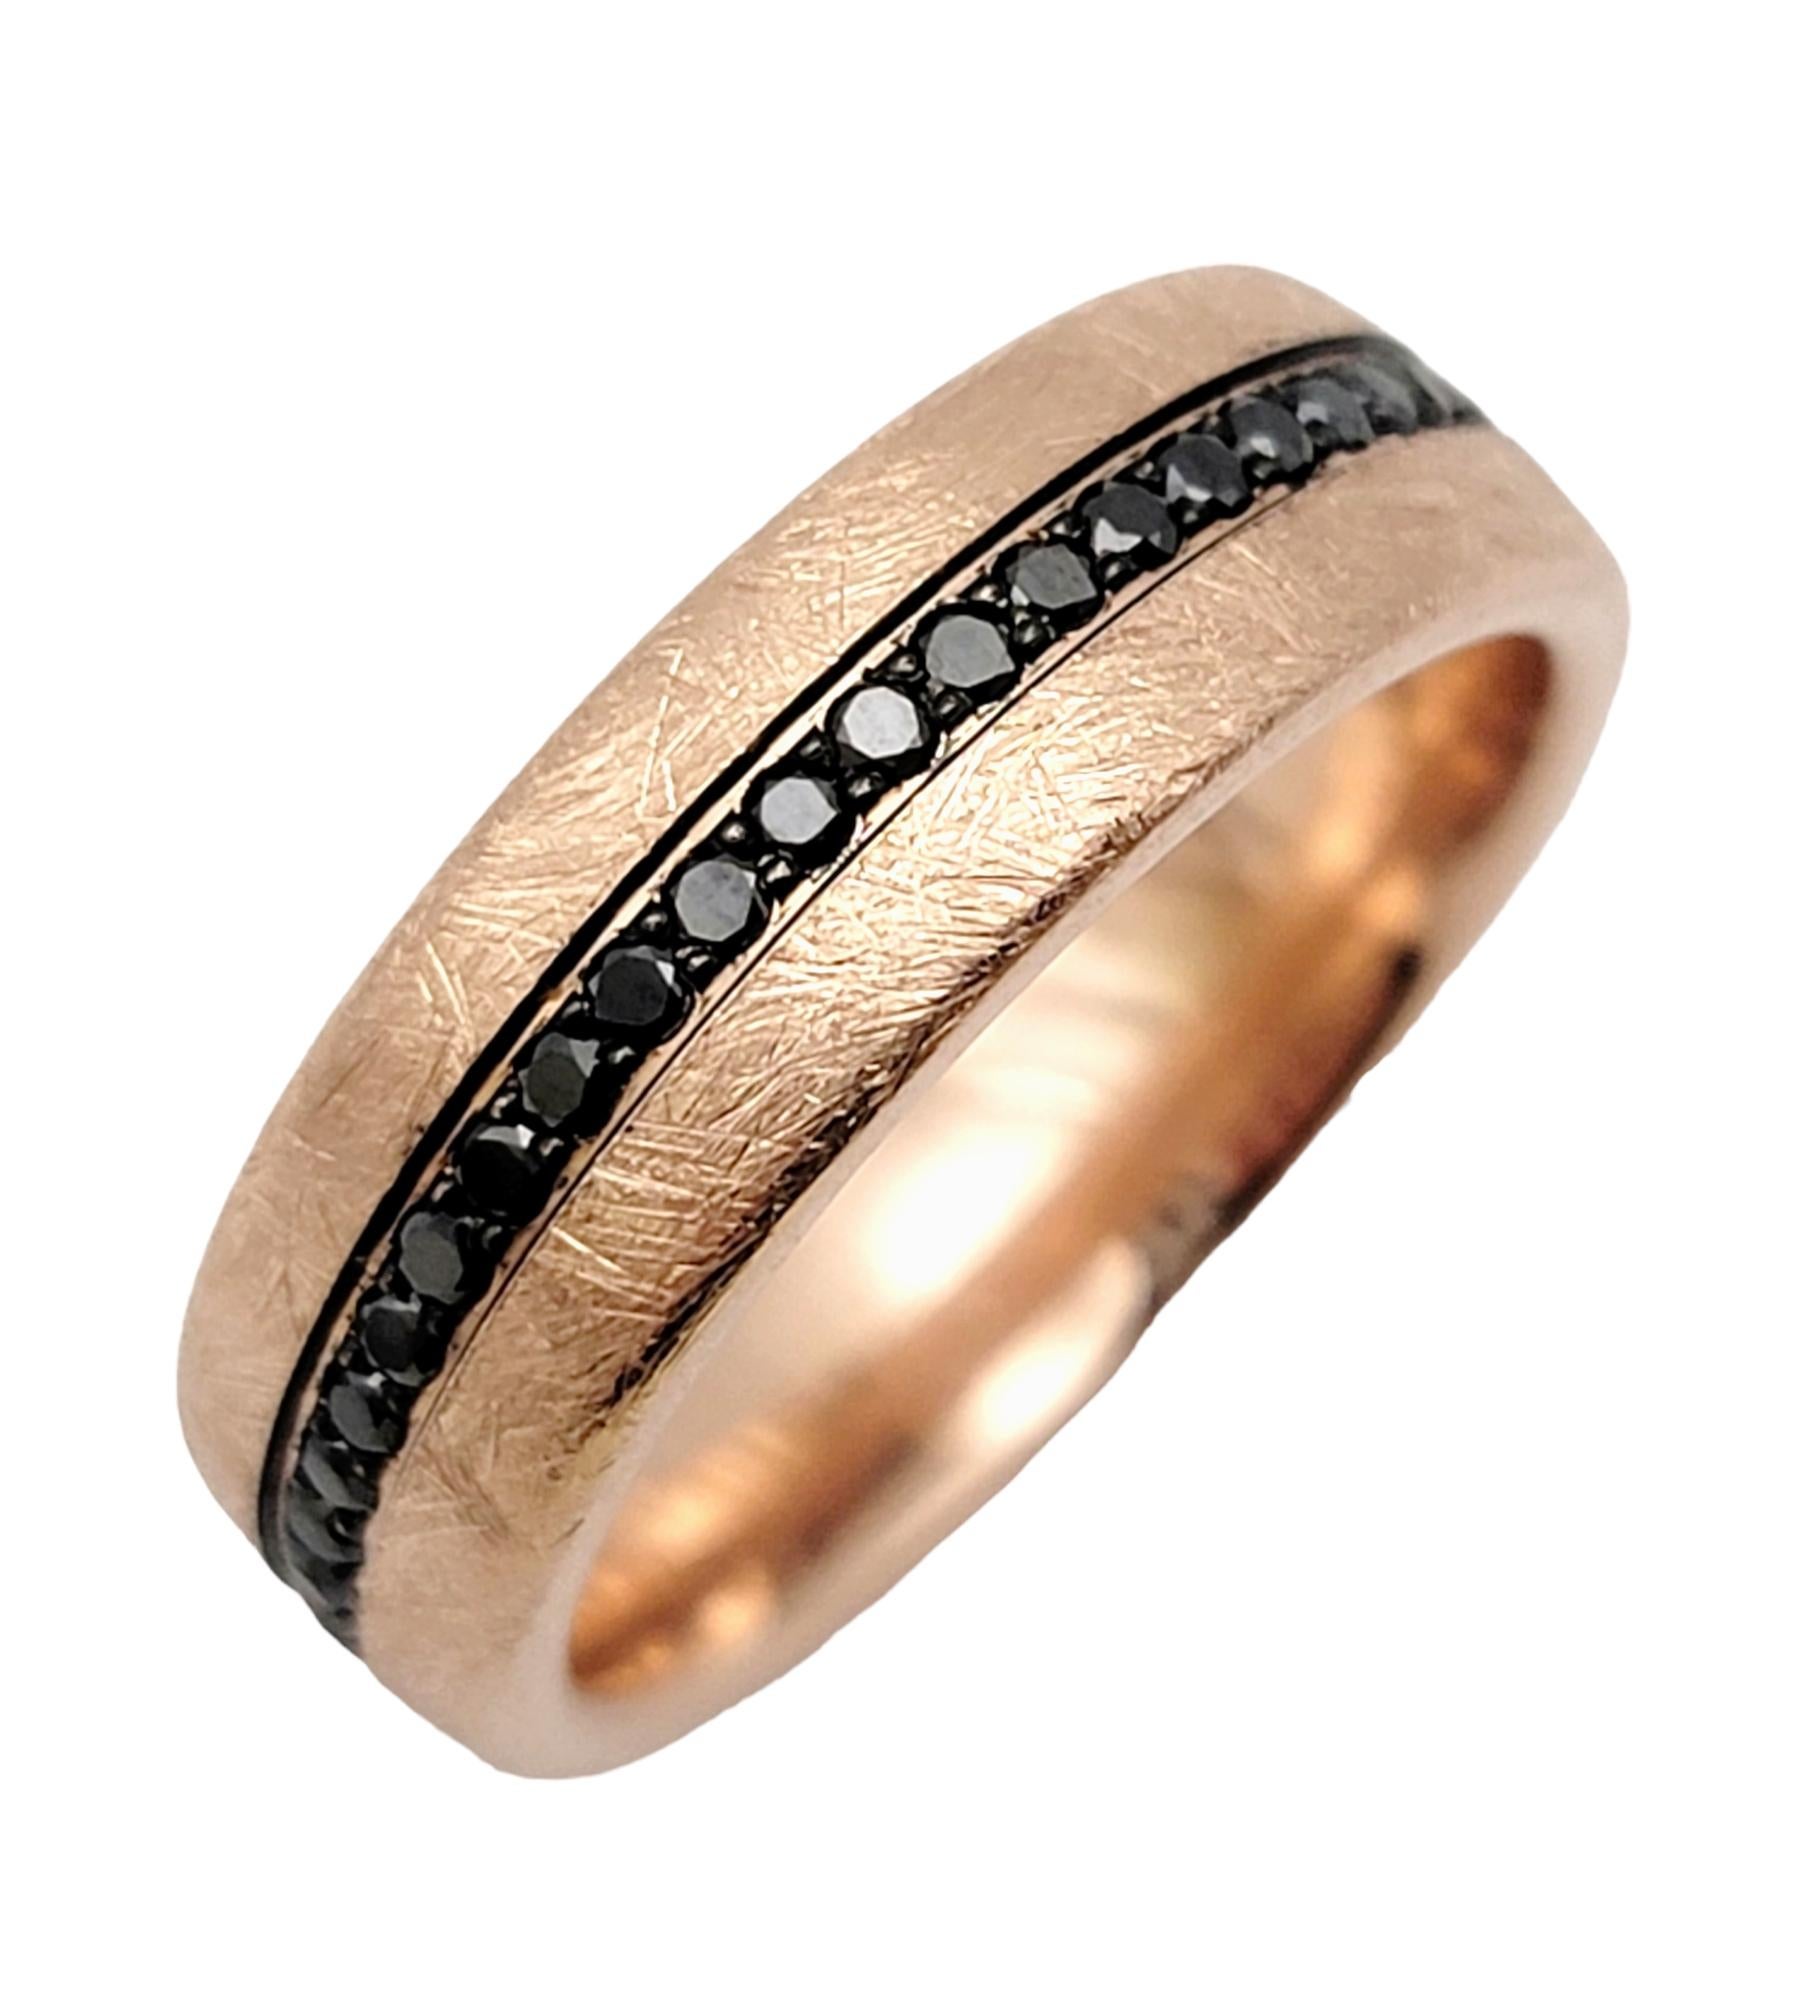 Ring size: 10

Sleek and contemporary wedding band ring designed by Bleu Royale. Beautifully textured rose gold fills the band from end to end while rich black diamonds accentuate the center. A perfectly unique unisex design to say 